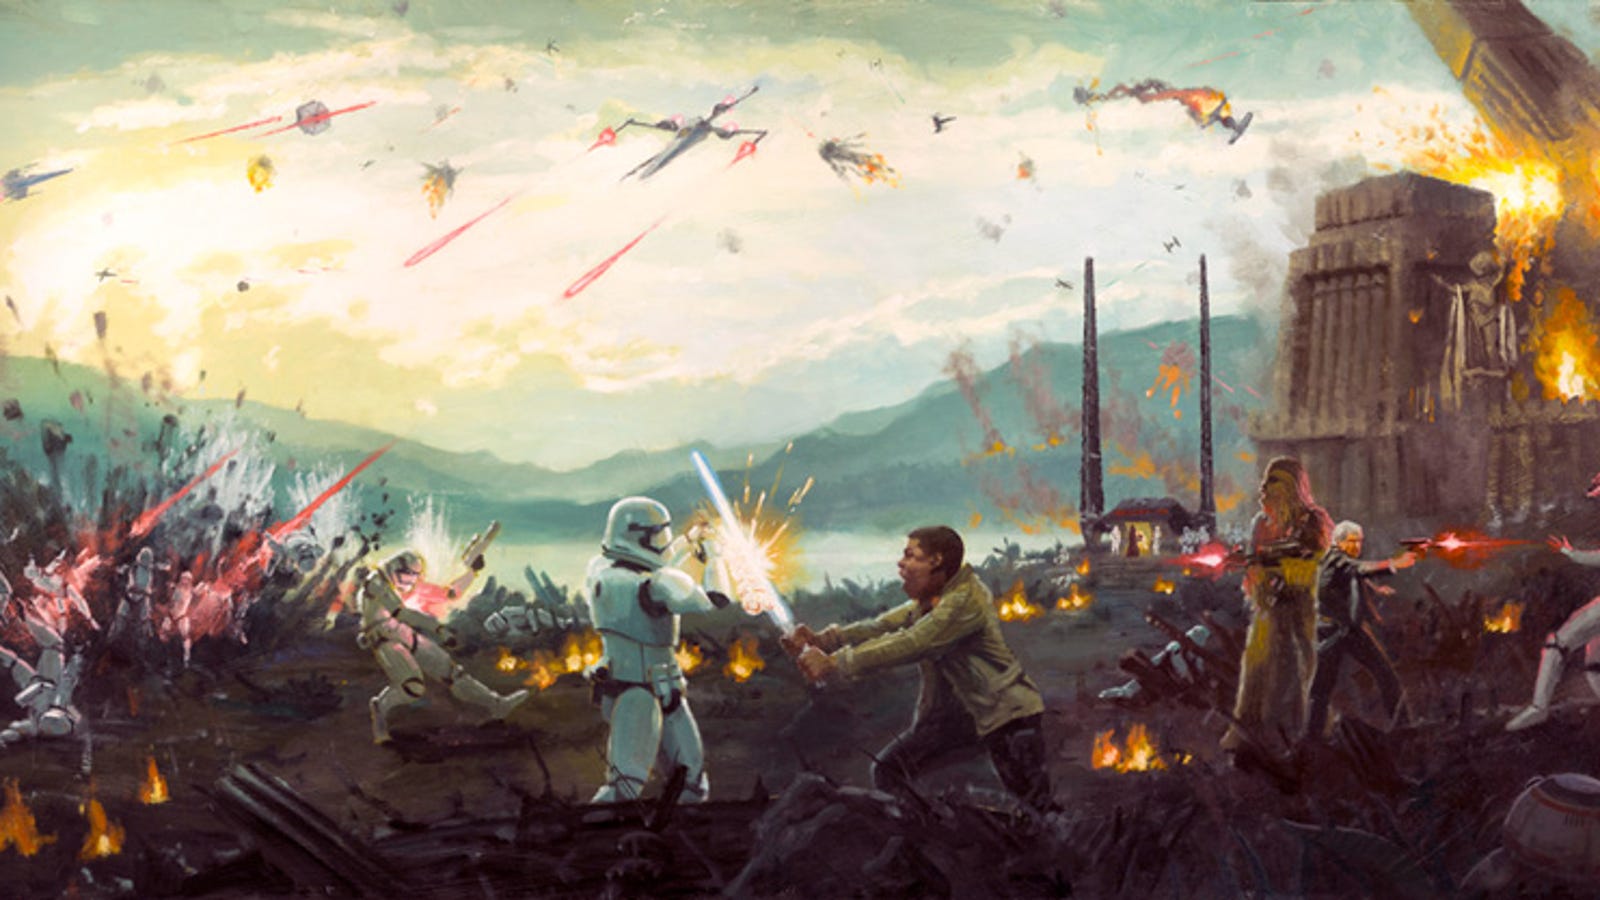 Star Wars example #319: Finn Takes on TR-8R in This Insane Force Awakens Art, Part of a Batch of New Star Wars Pieces